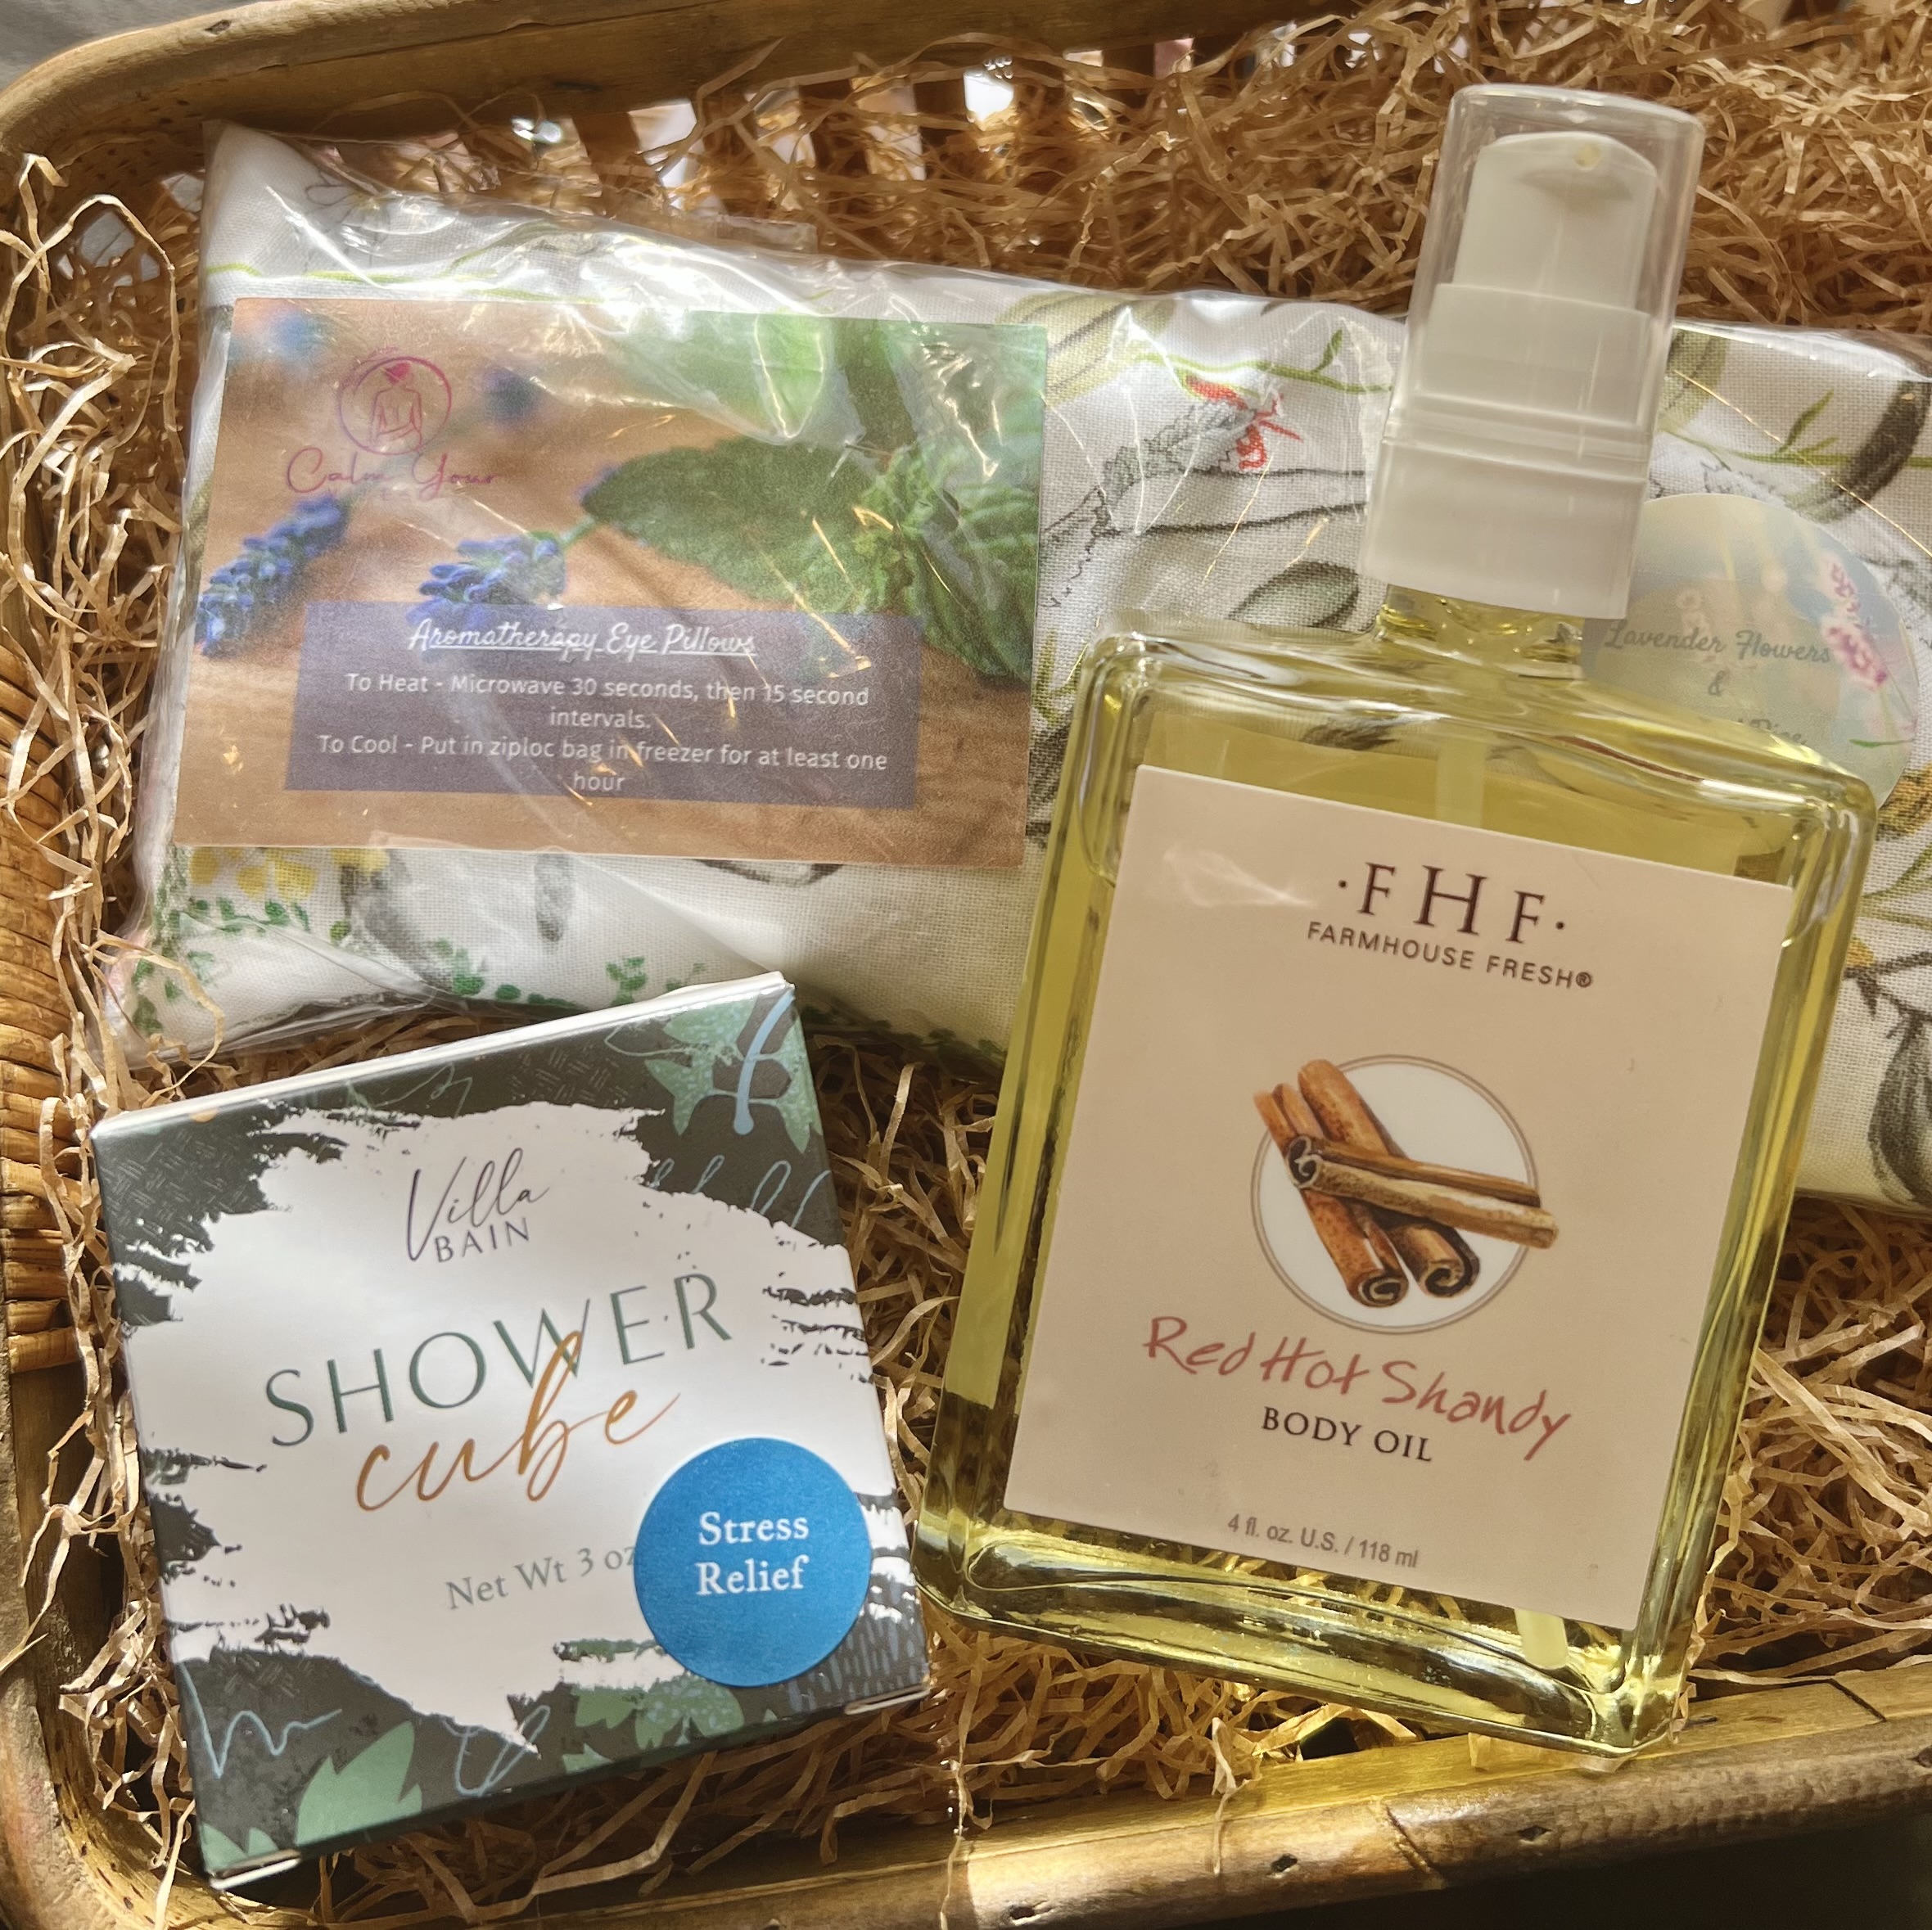 FarmHouse Fresh Red Hot Shandy body oil, Villa Bain stress relief shower cube, and Calm Your Vibe lavender aromatherapy weighted eye pillow sit in a woven basket full of brown crinkle paper.